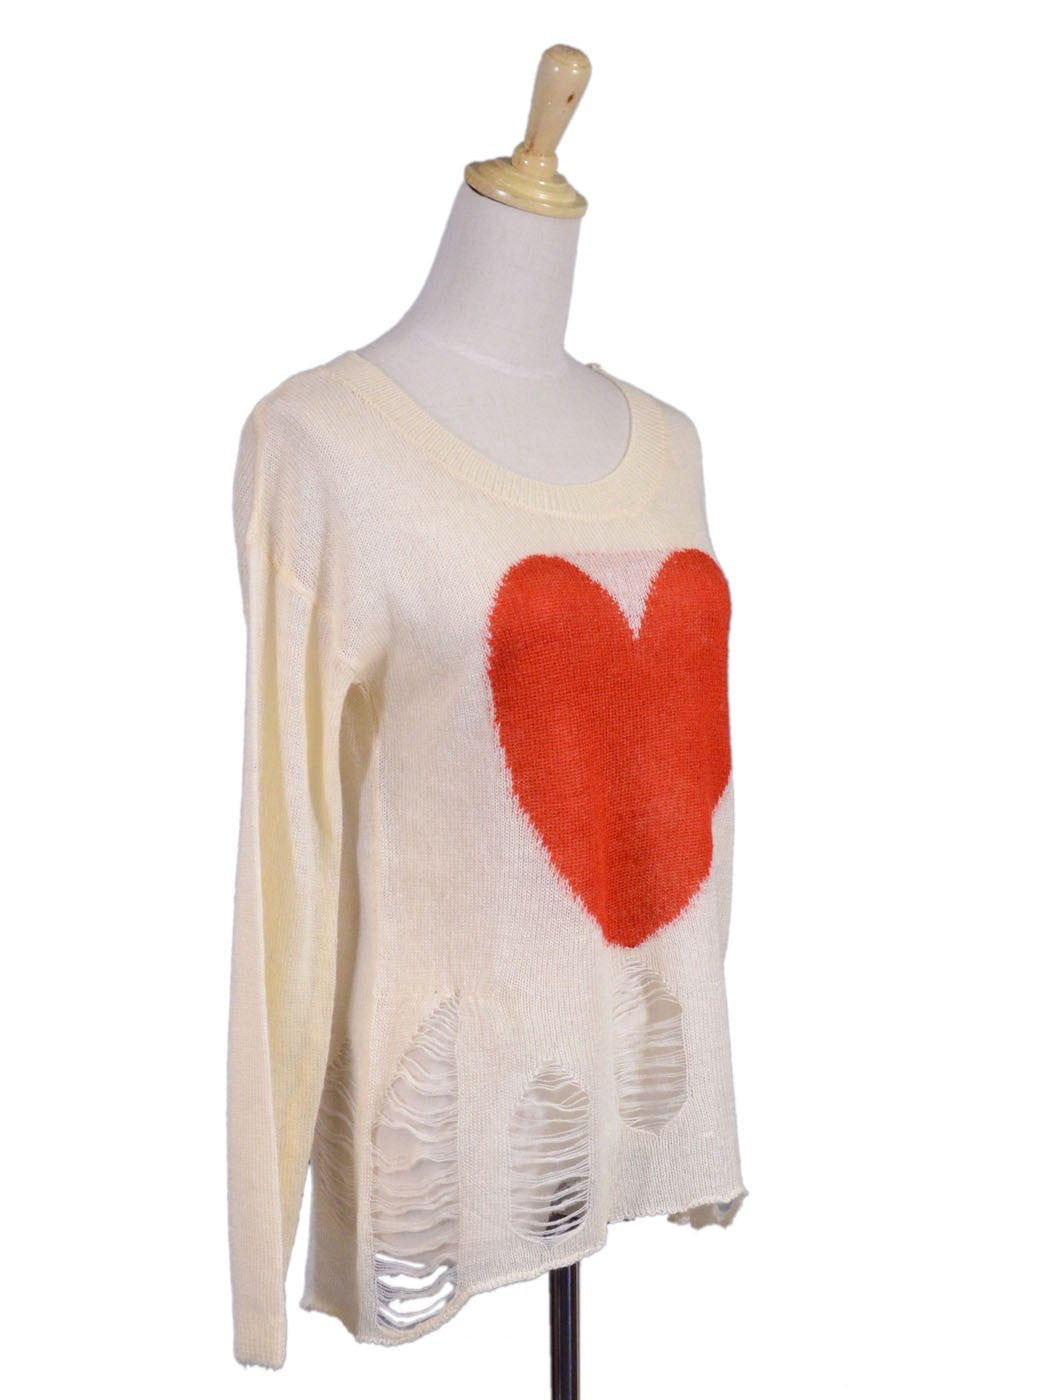 TCEC Valentine Long Sleeves Big Heart Prints Destroyed Knit Pullover Sweater